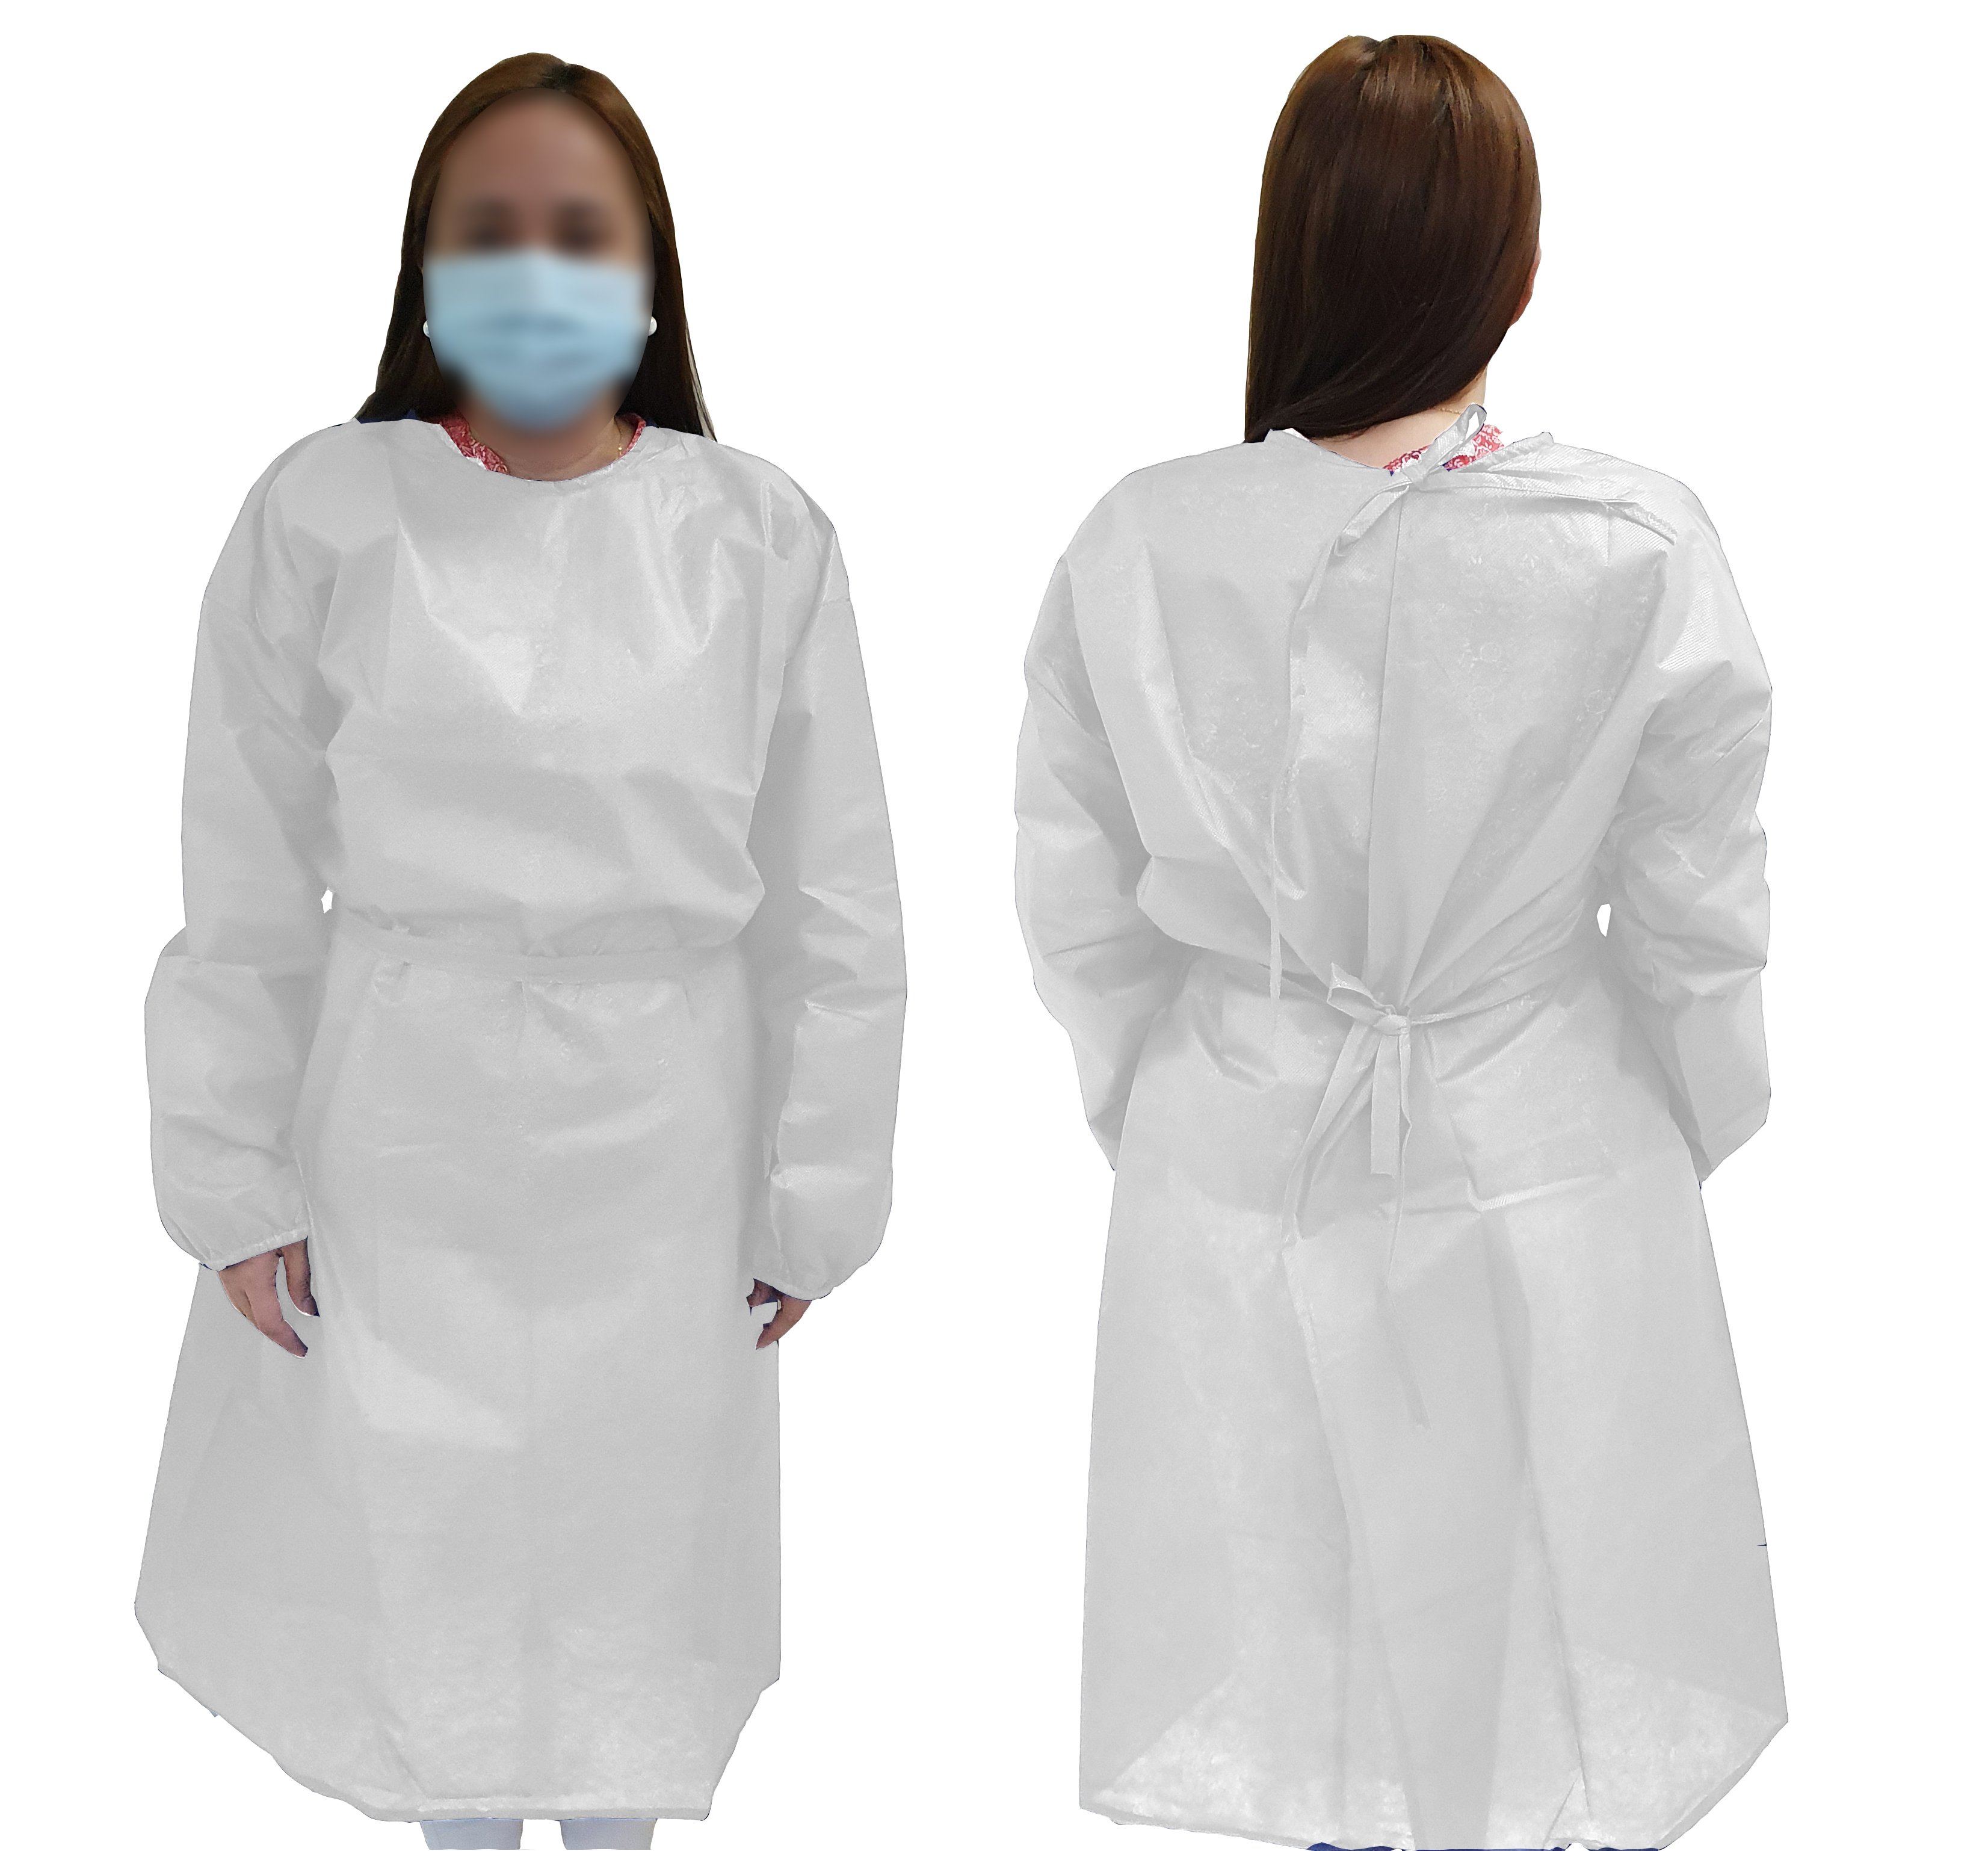 3 Kinds of People Who May Need A Reusable Isolation Gown